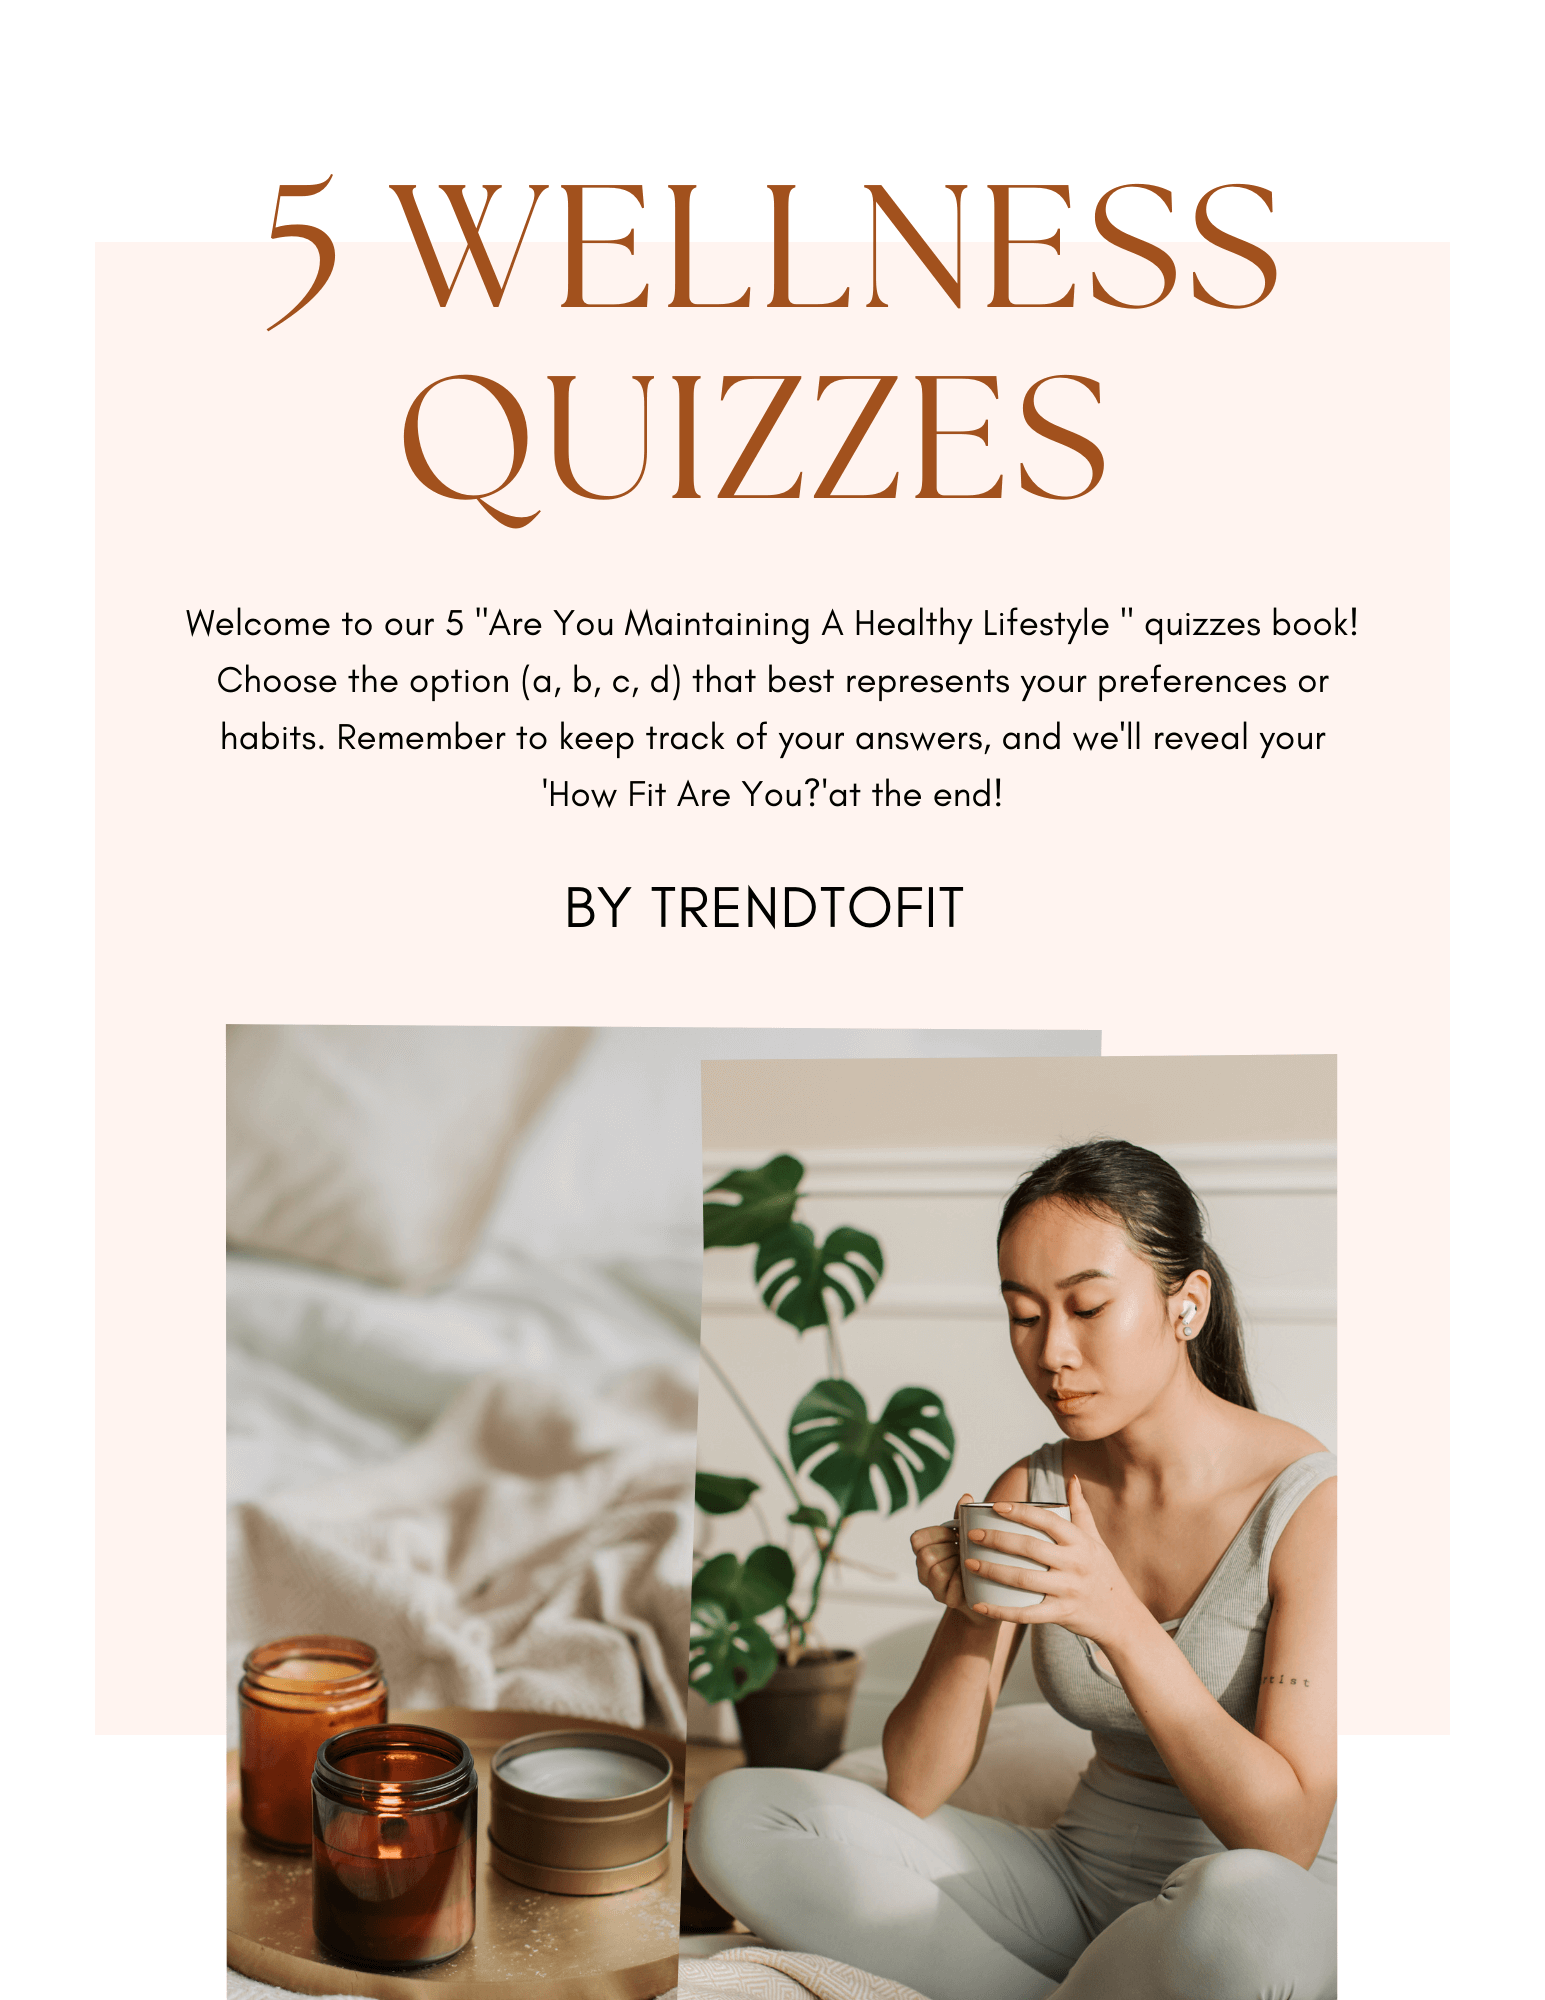 Subscribe to get wellness quizzes e book